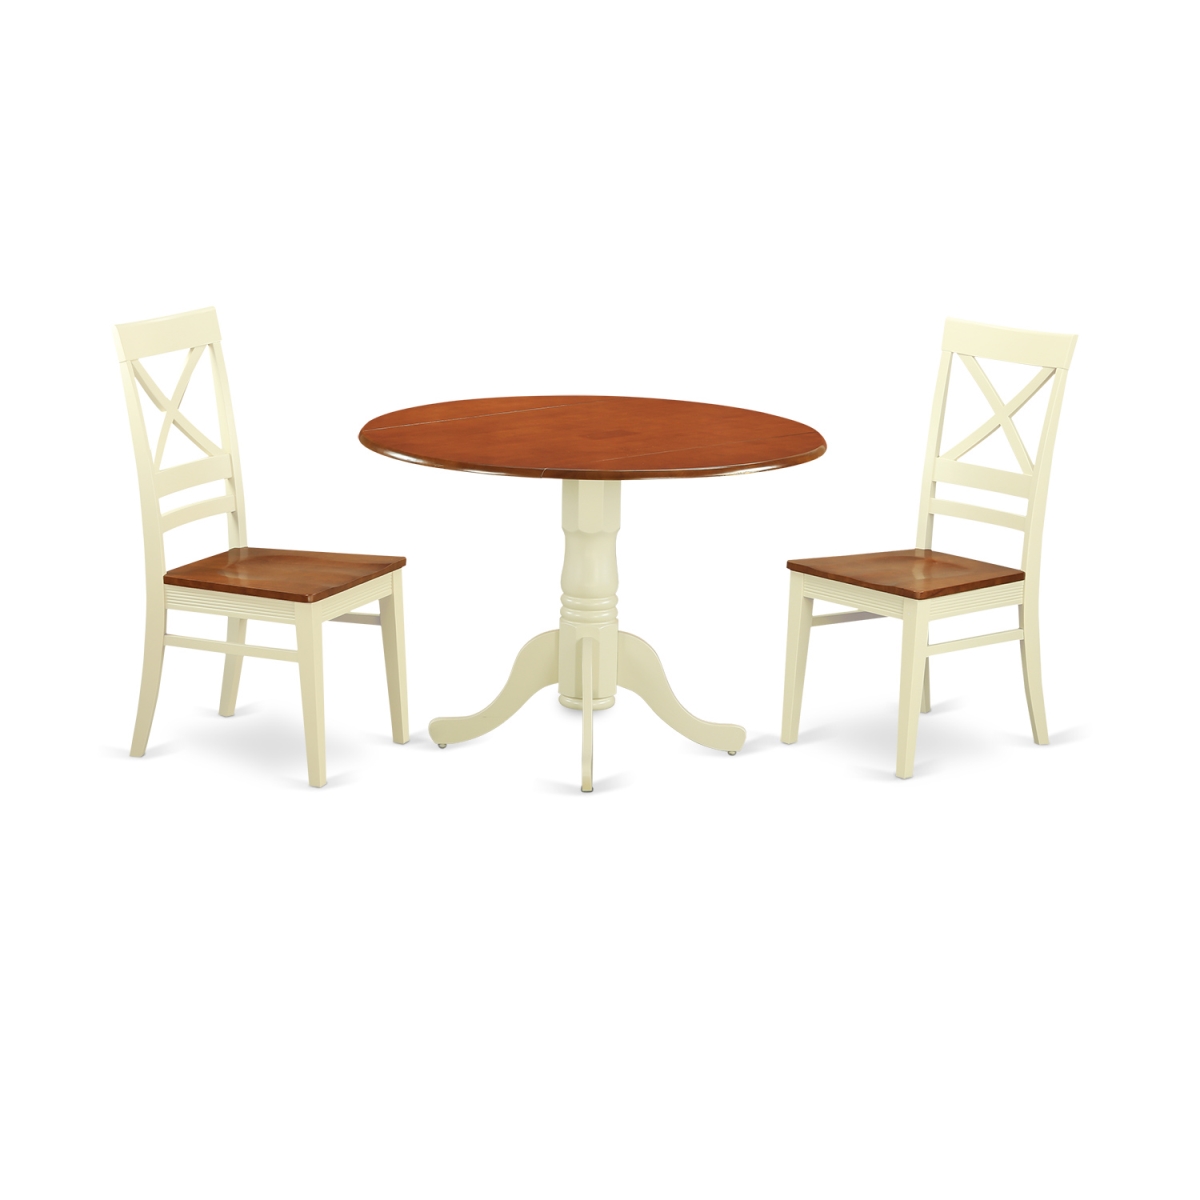 Picture of East West Furniture DLQU3-BMK-W Dining Room Table Set with 2 Table & 2 Chairs, Buttermilk & Cherry - 3 Piece